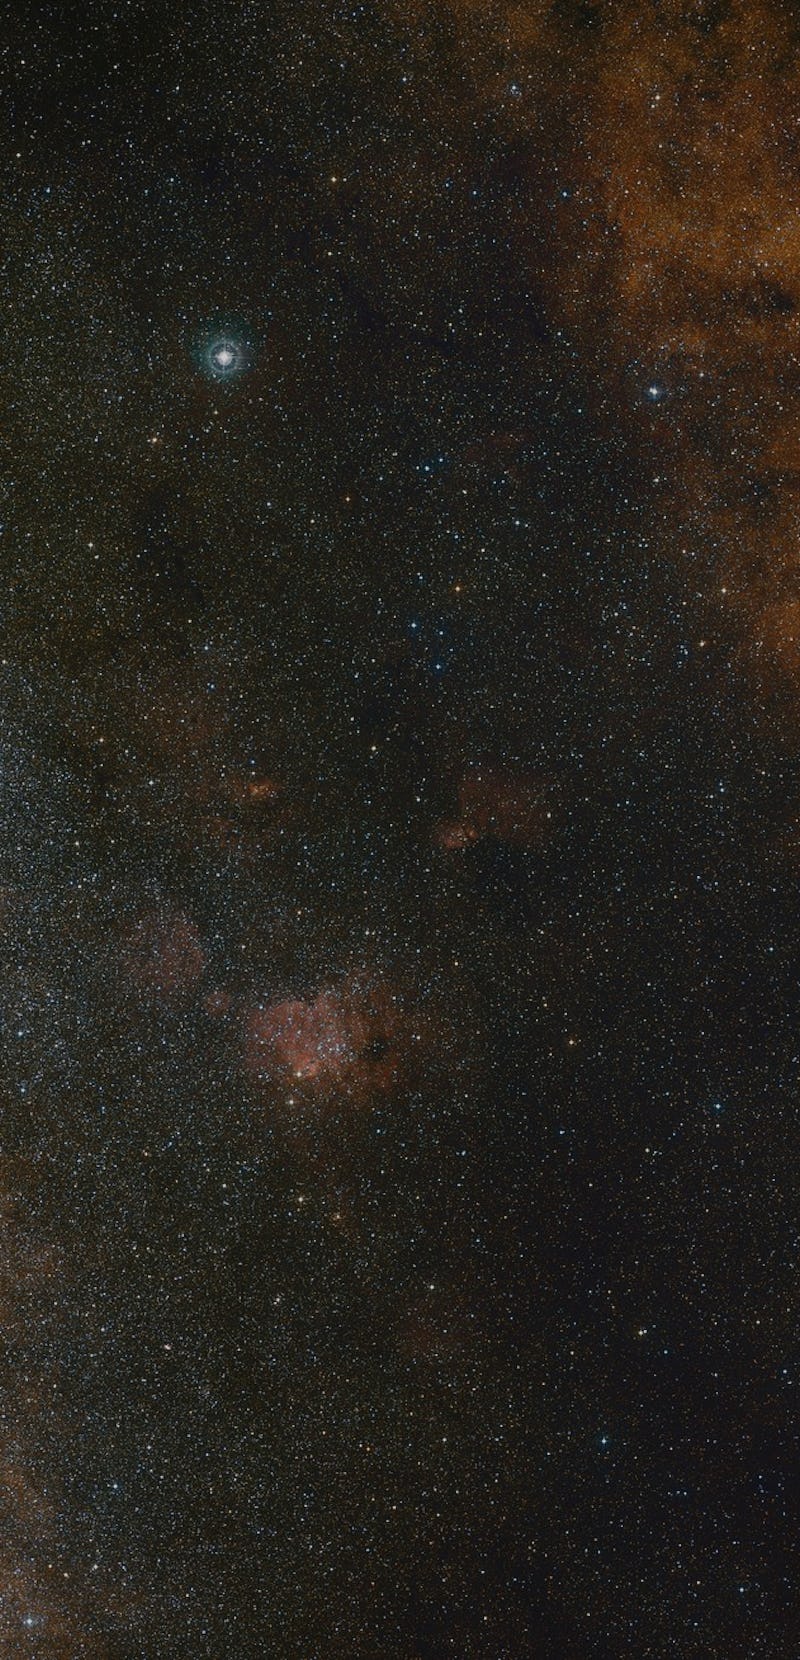 wide-field view of Sagittarius A at the center of the Milky Way